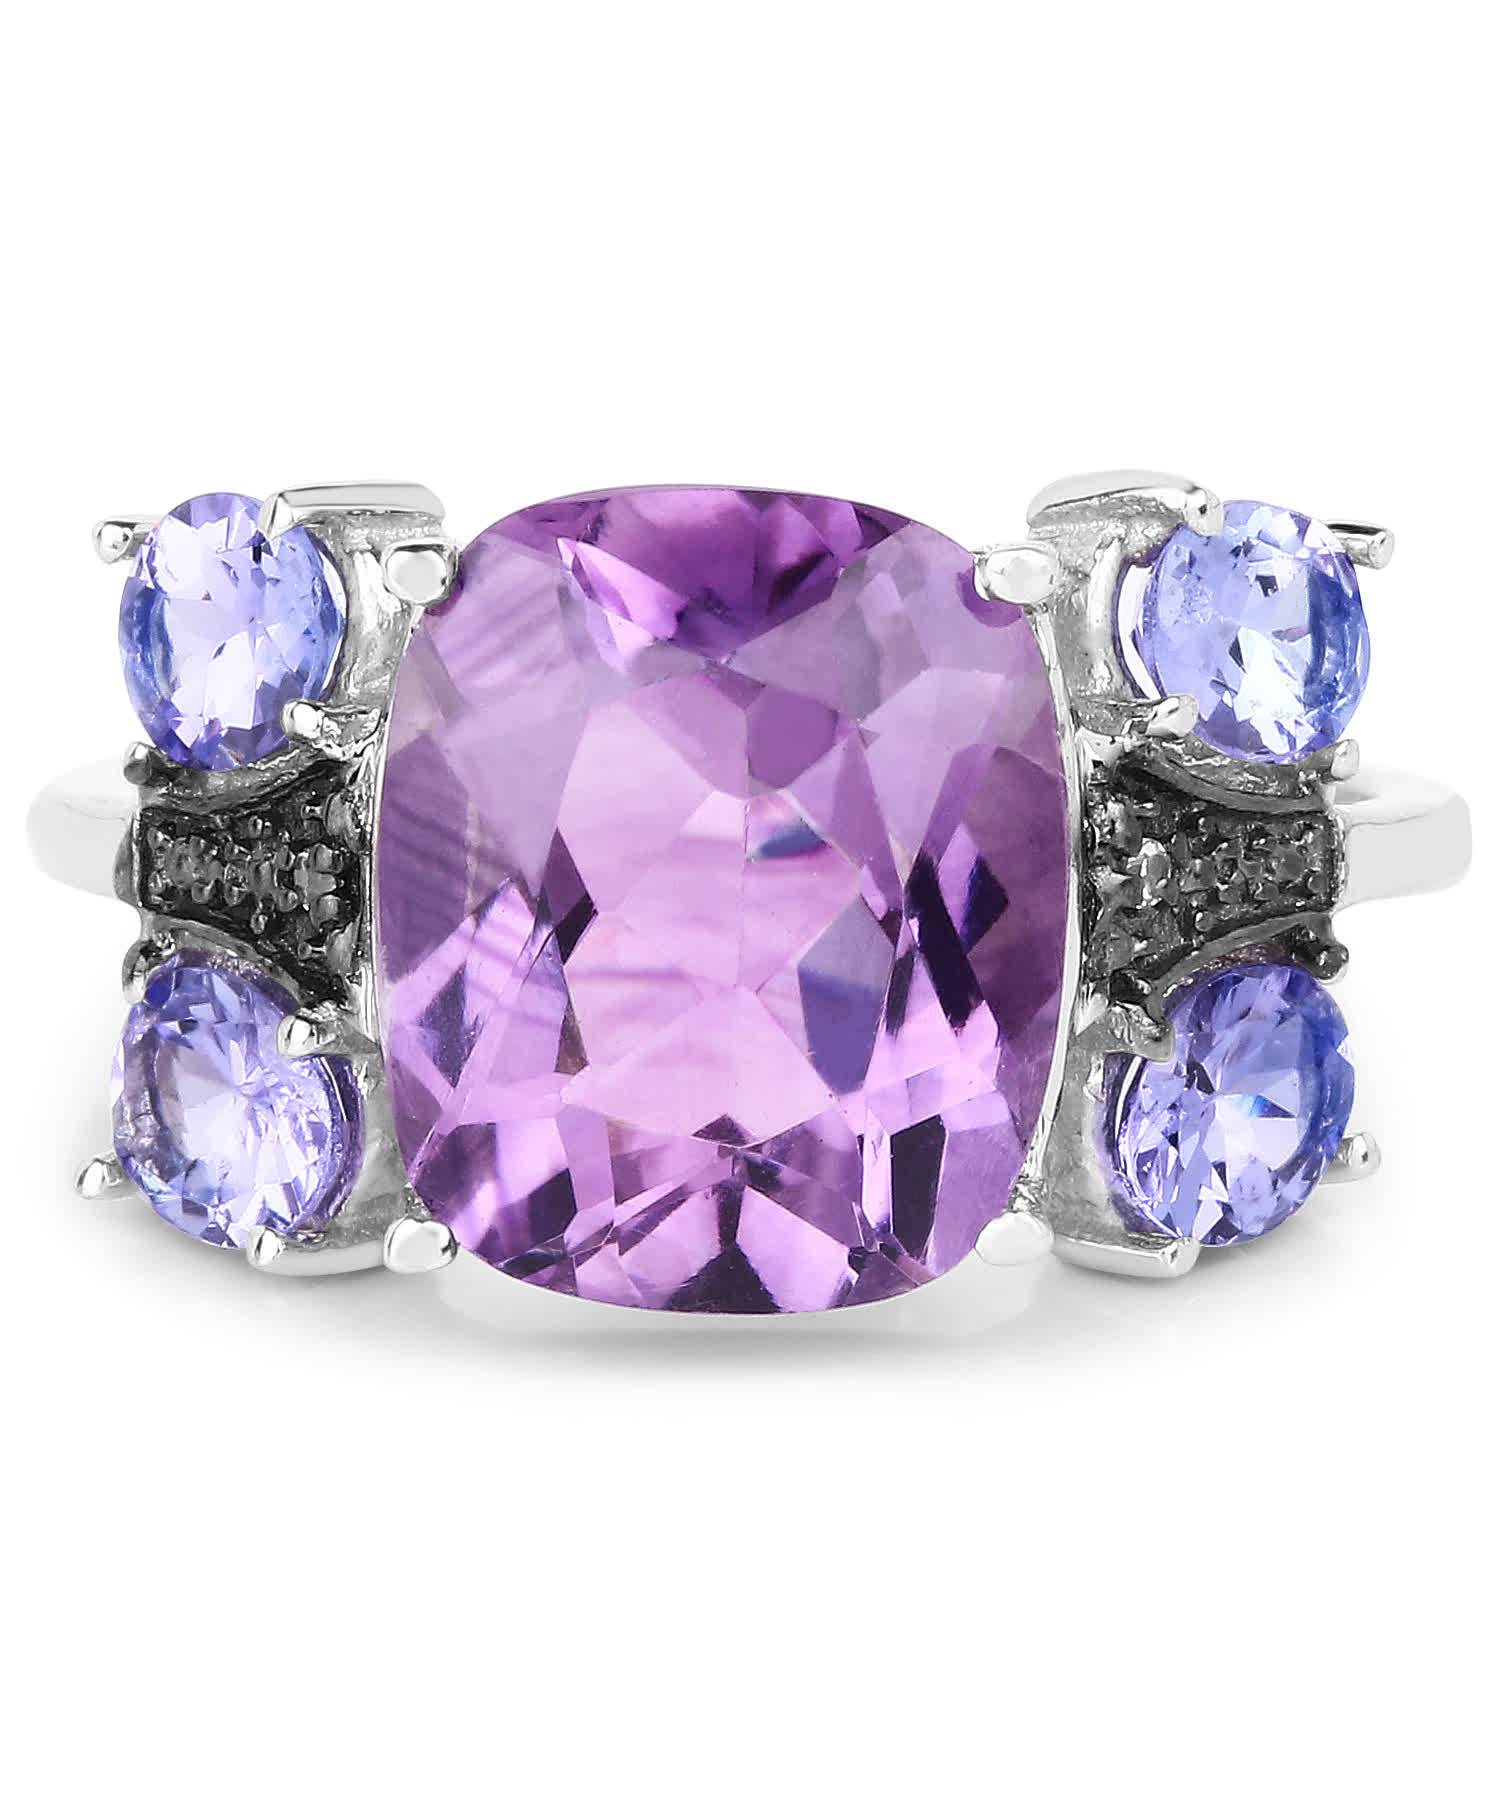 5.53ctw Natural Amethyst, Tanzanite and Topaz Rhodium Plated Silver Cocktail Ring View 3